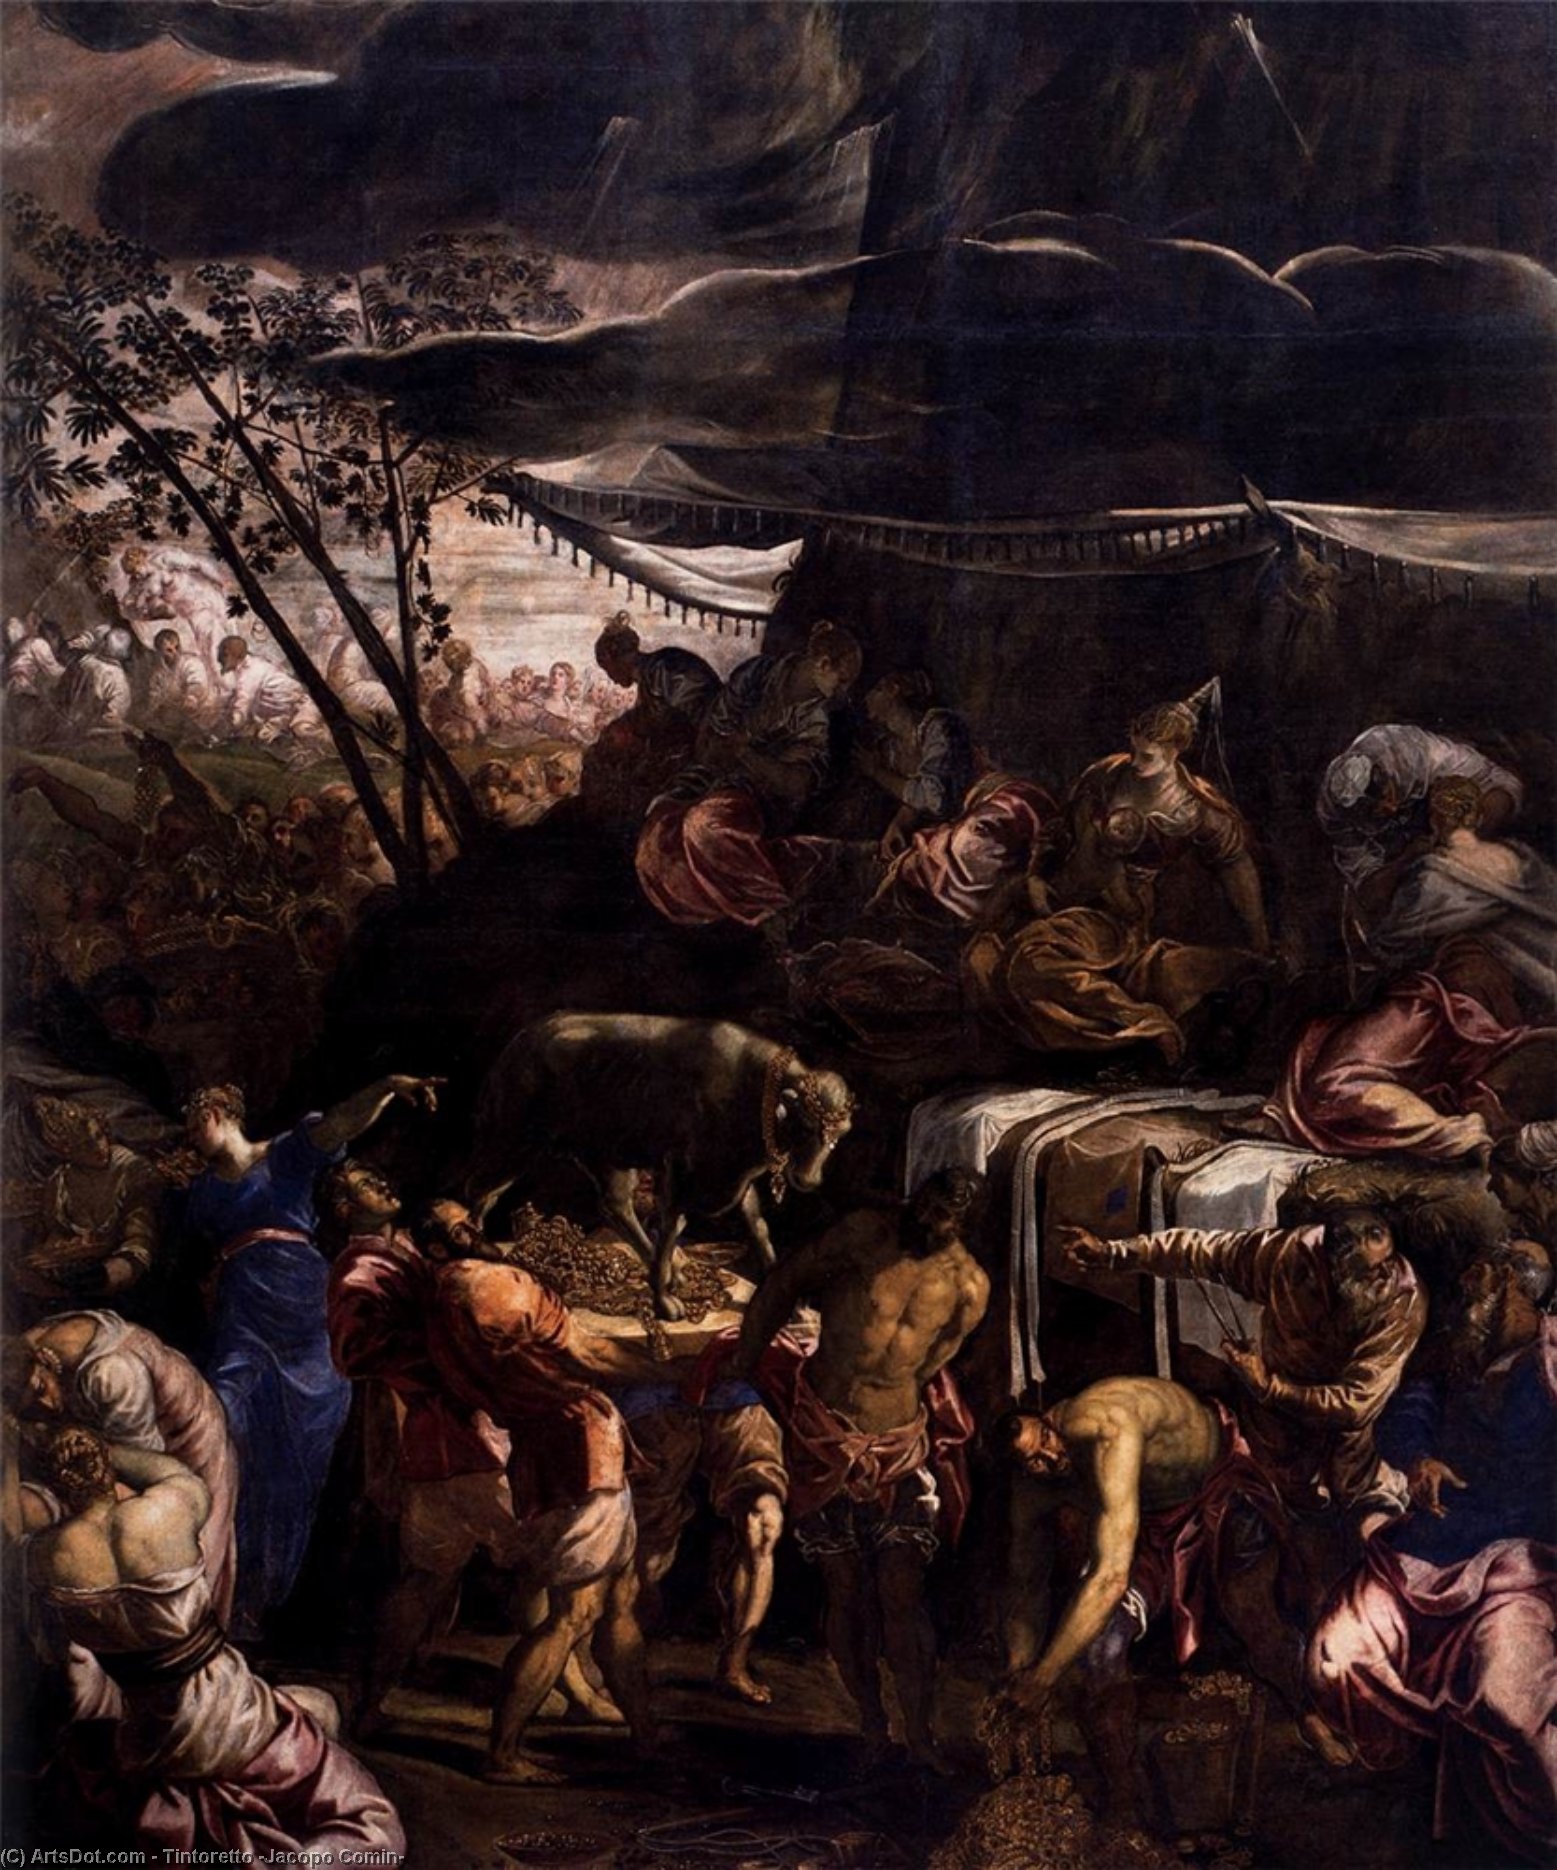 WikiOO.org - Güzel Sanatlar Ansiklopedisi - Resim, Resimler Tintoretto (Jacopo Comin) - Moses Receiving the Tables of the Law (detail)